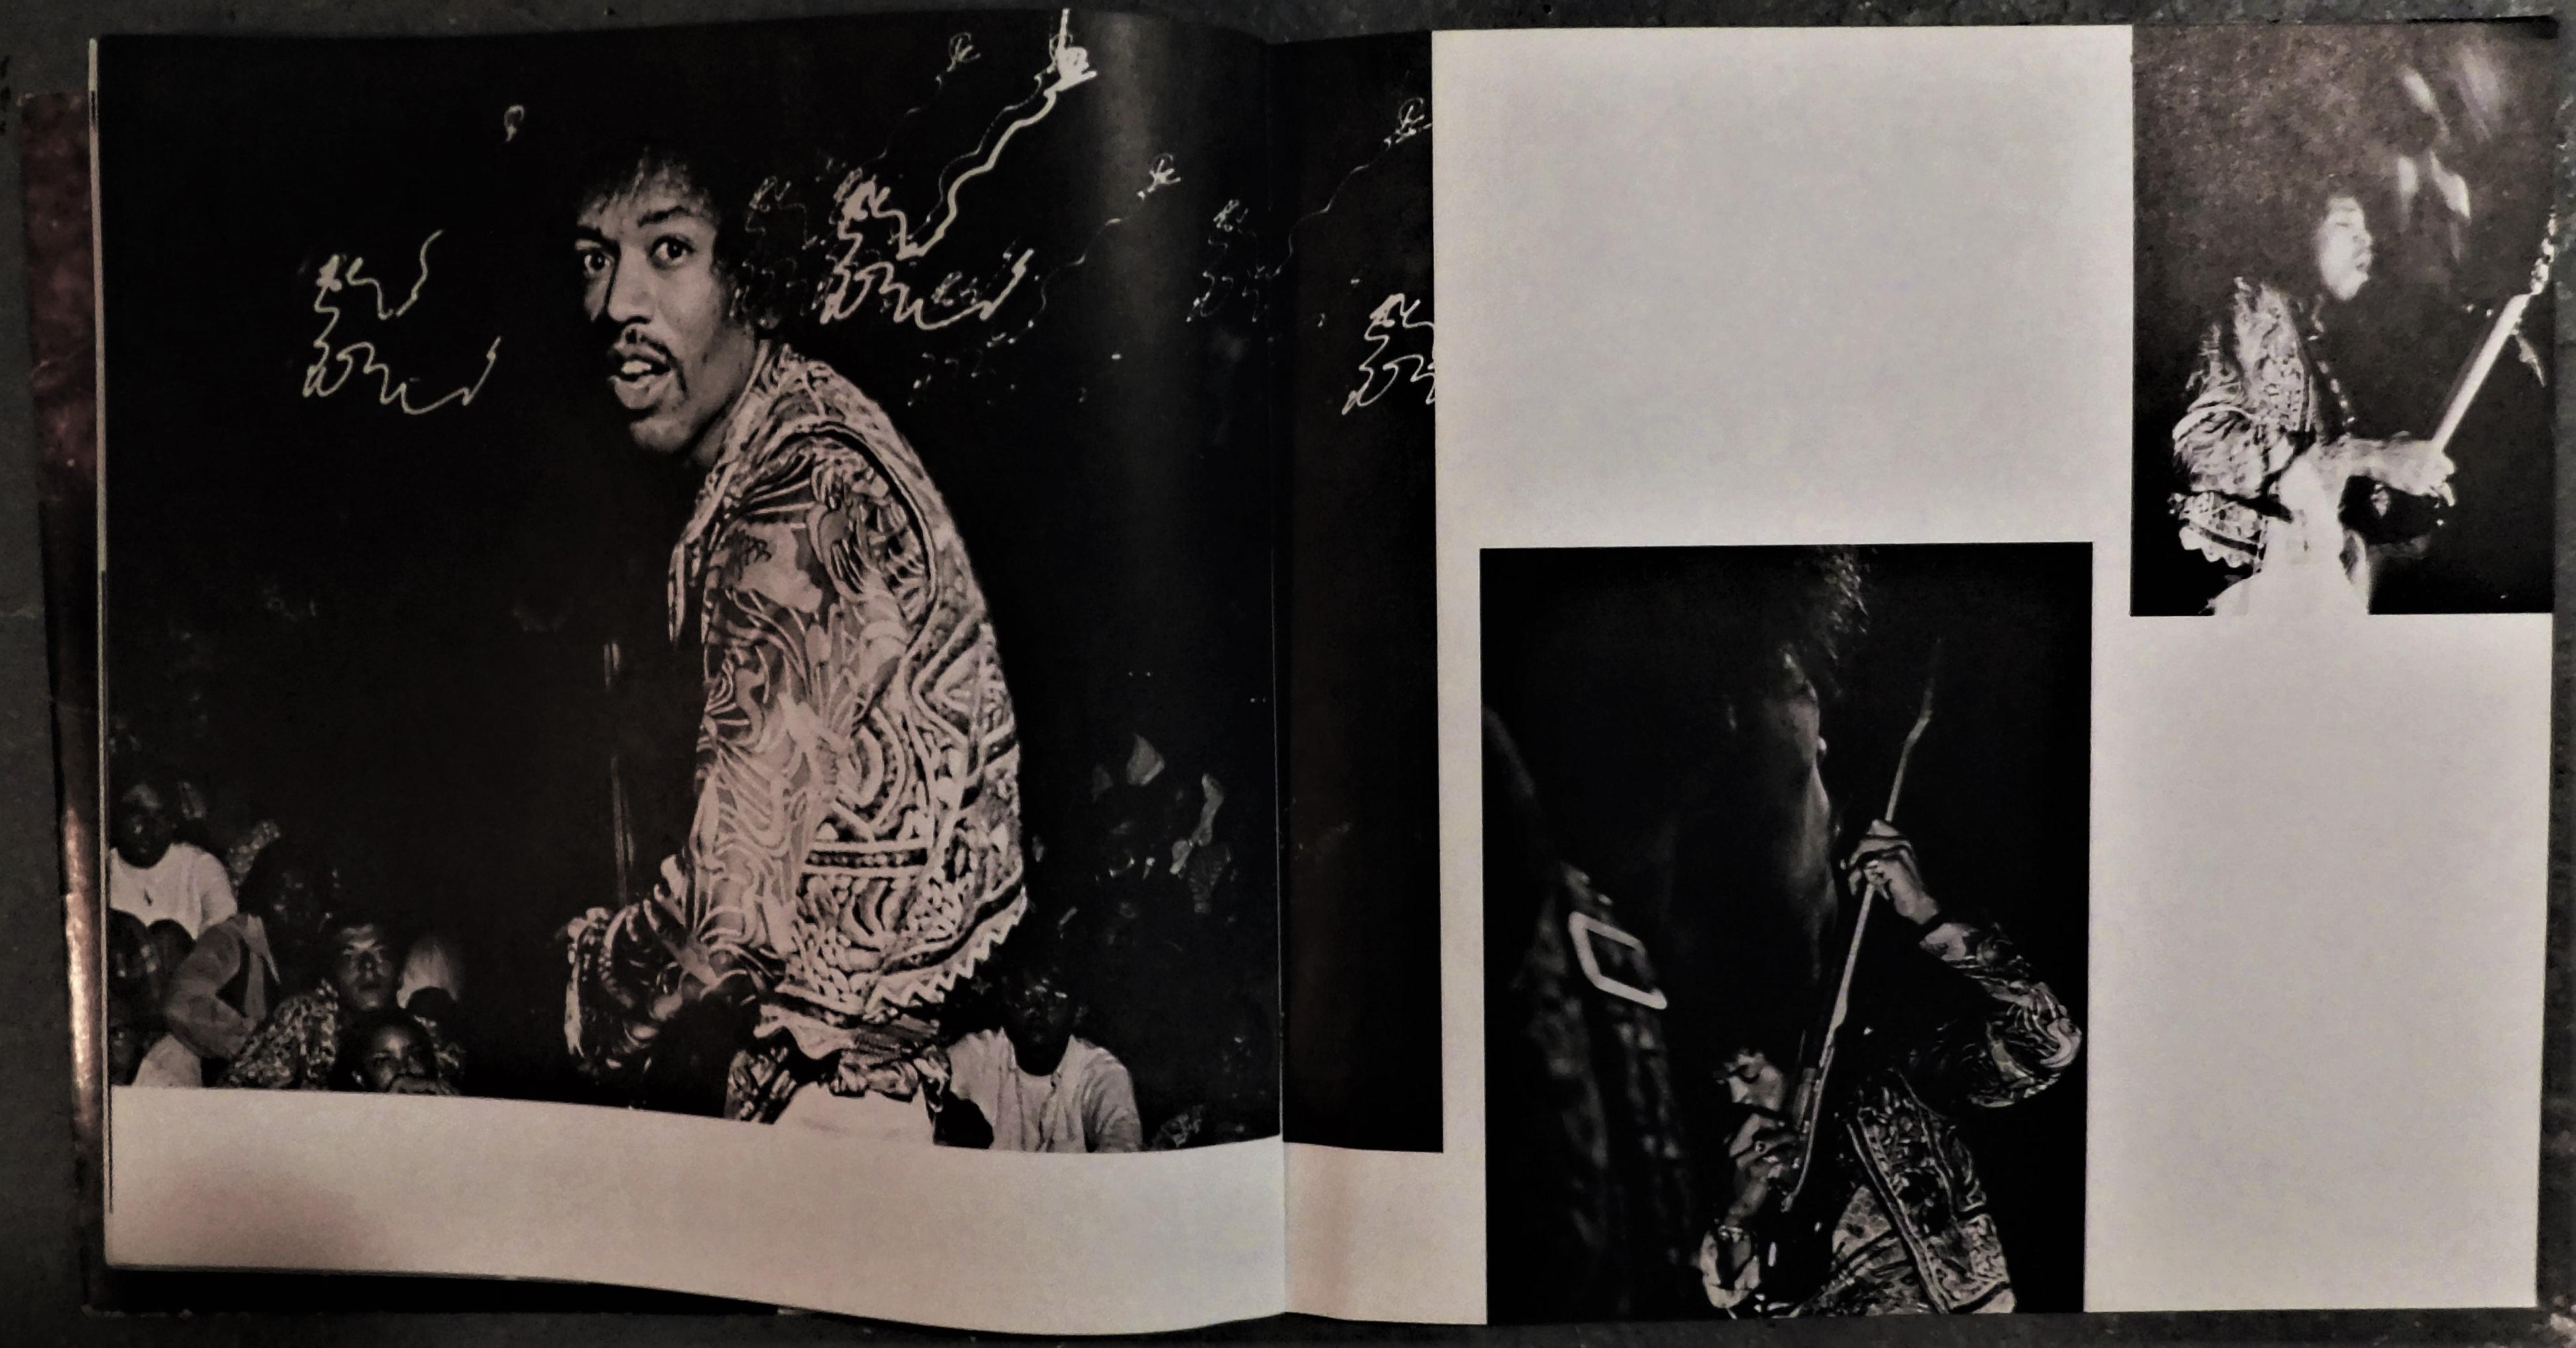 American Jimi Hendrix 1969 Electric Church a Visual Experience Tour Program Book For Sale